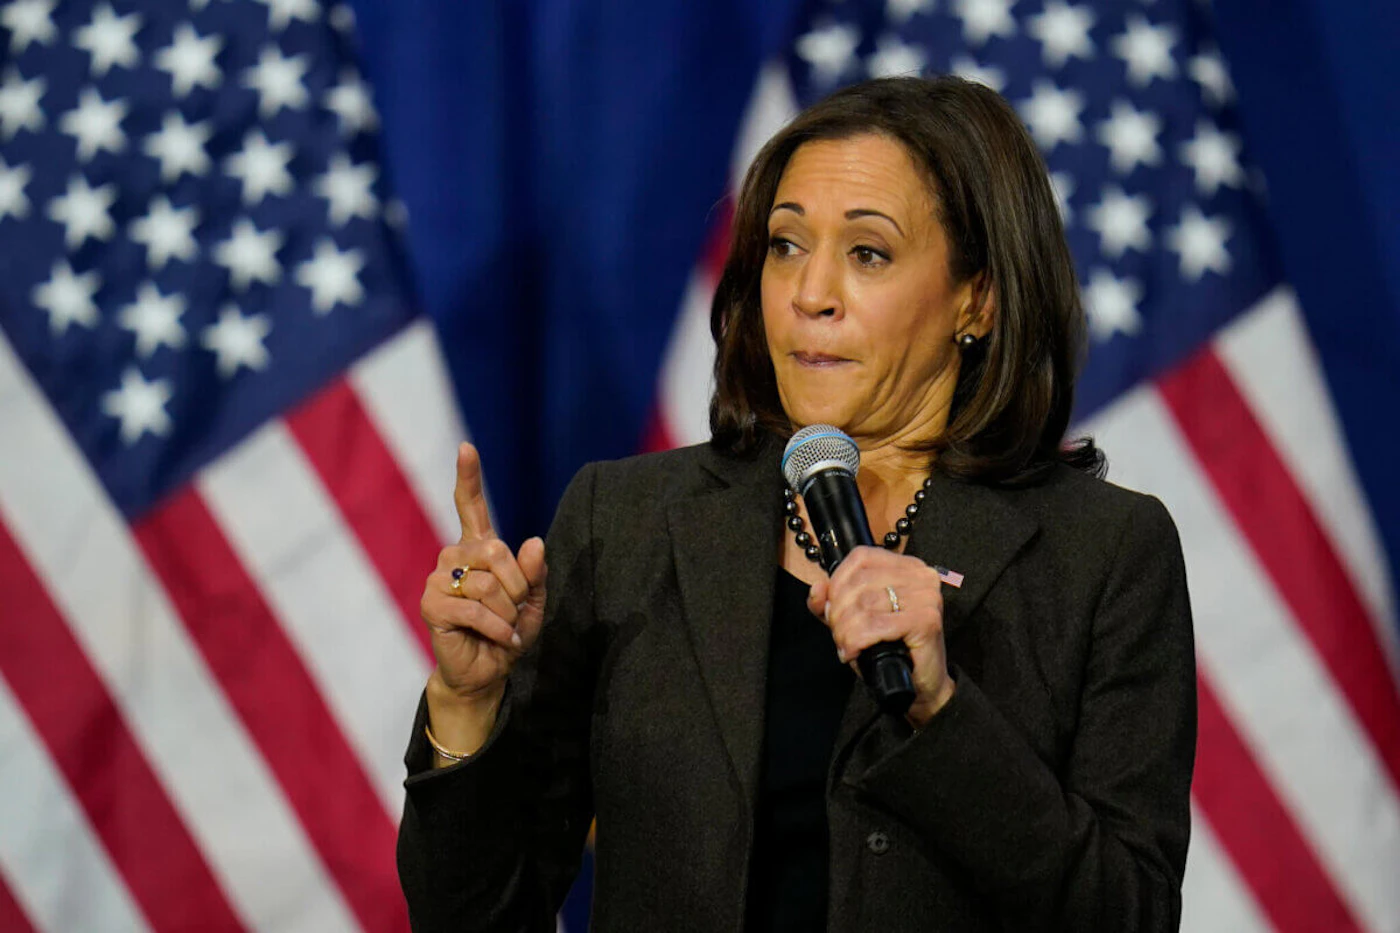 Vice President Kamala Harris speaks at campaign event for Maryland gubernatorial candidate Wes Moore, Saturday, Oct. 29, 2022, in Baltimore, Md. (AP Photo/Julio Cortez)